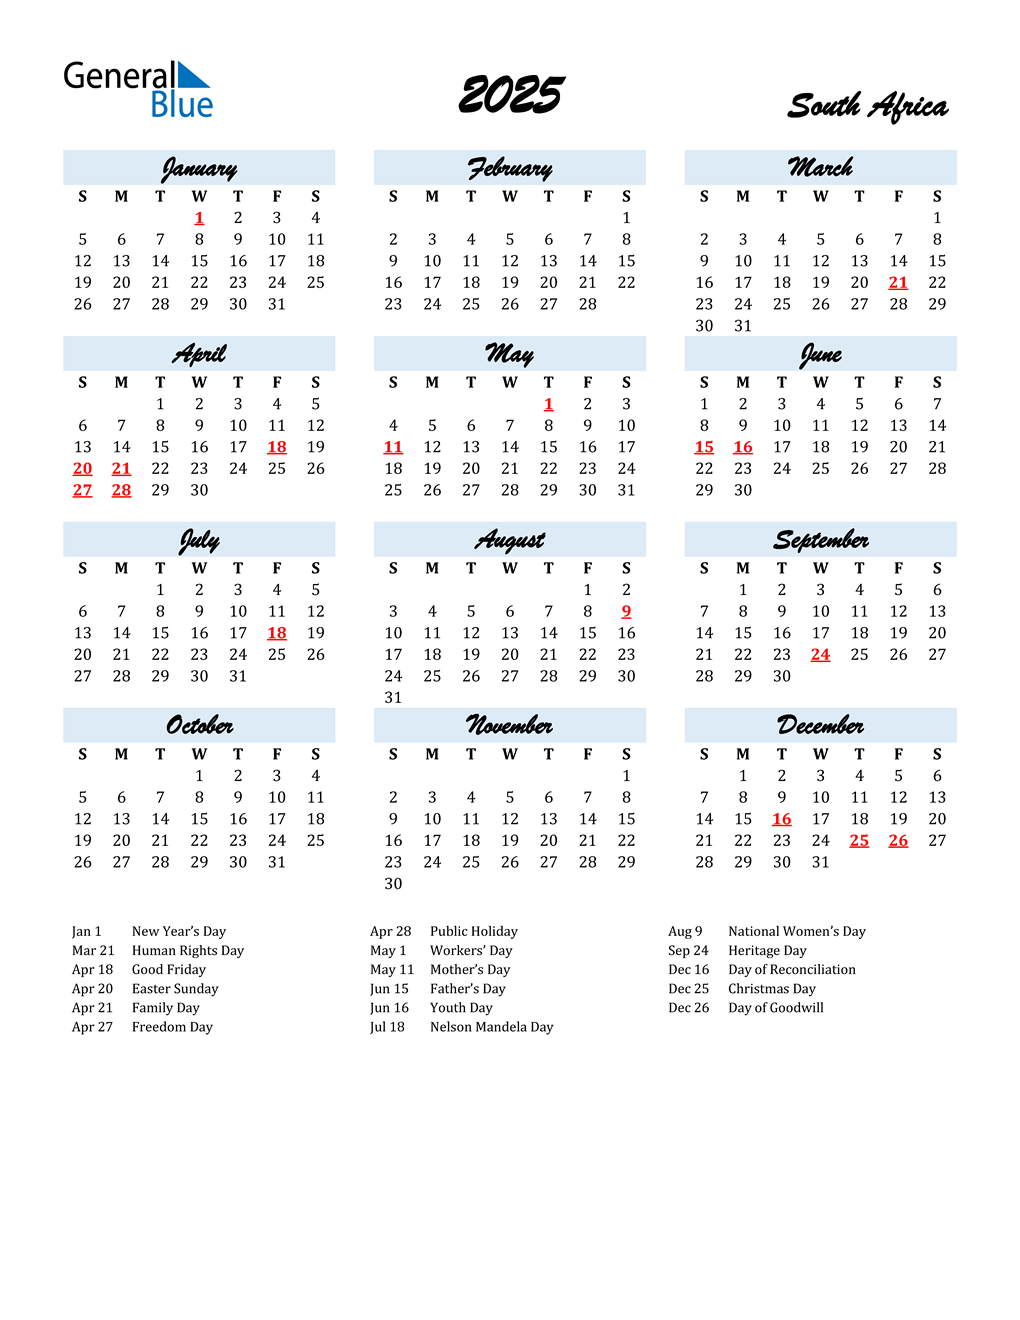 2025-calendar-with-week-numbers-and-holidays-for-australia-official-public-holidays-bank